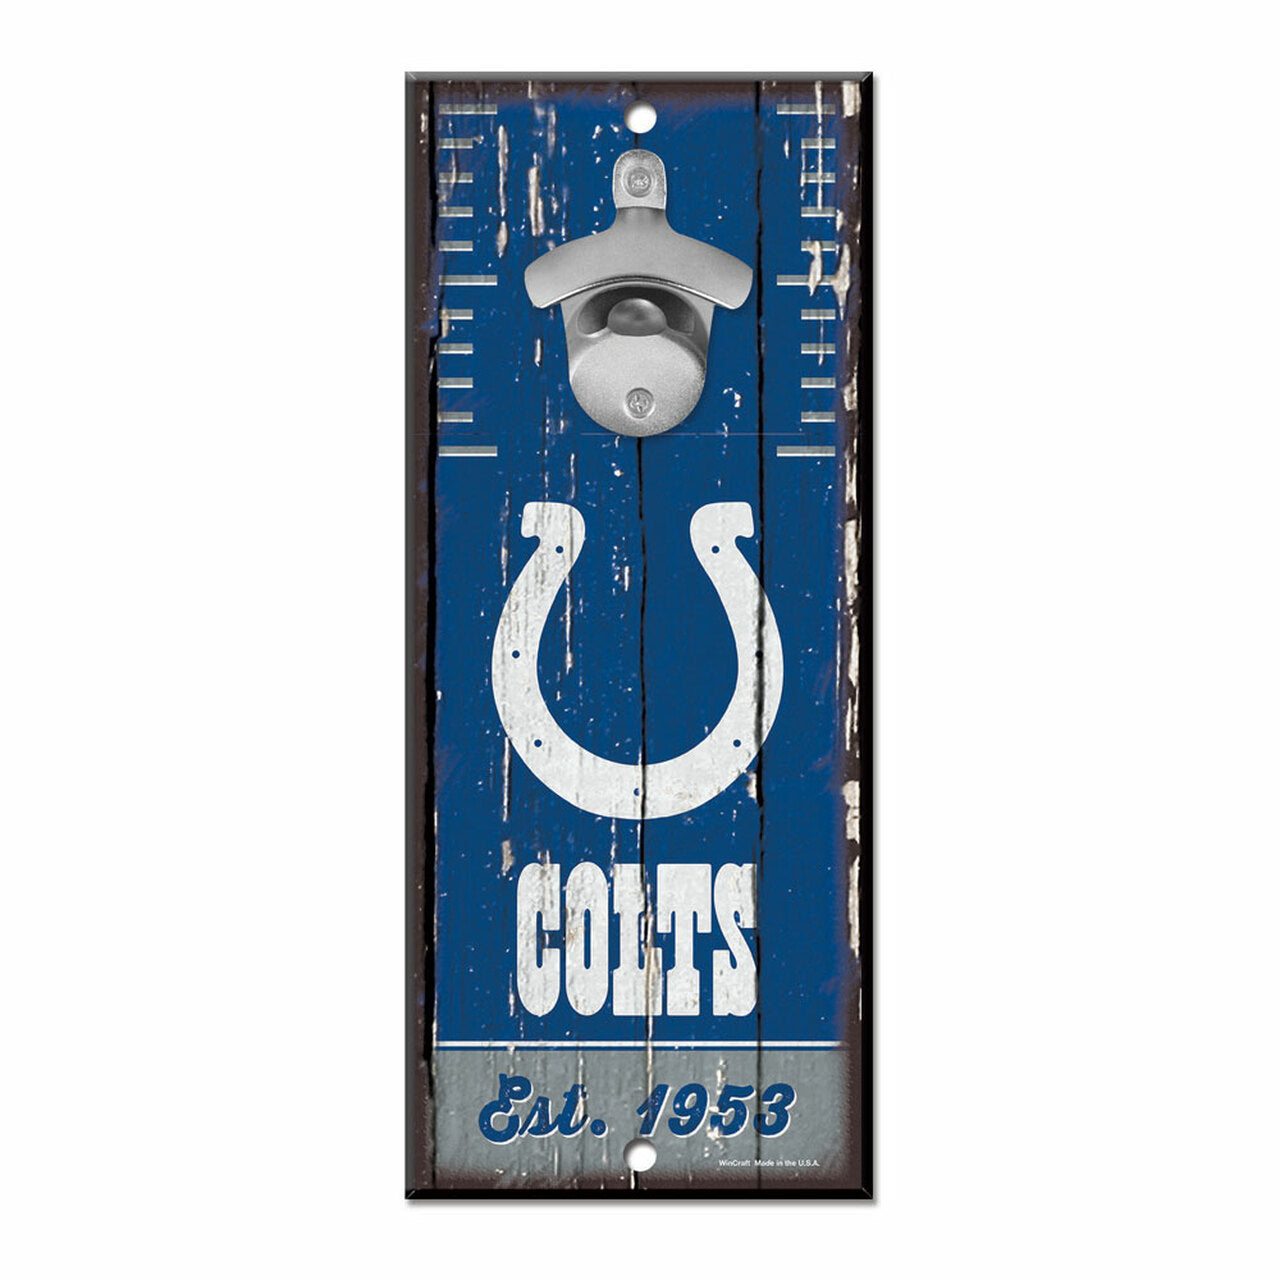 Indianapolis Colts 5" x 11" Bottle Opener Wood Sign by Wincraft